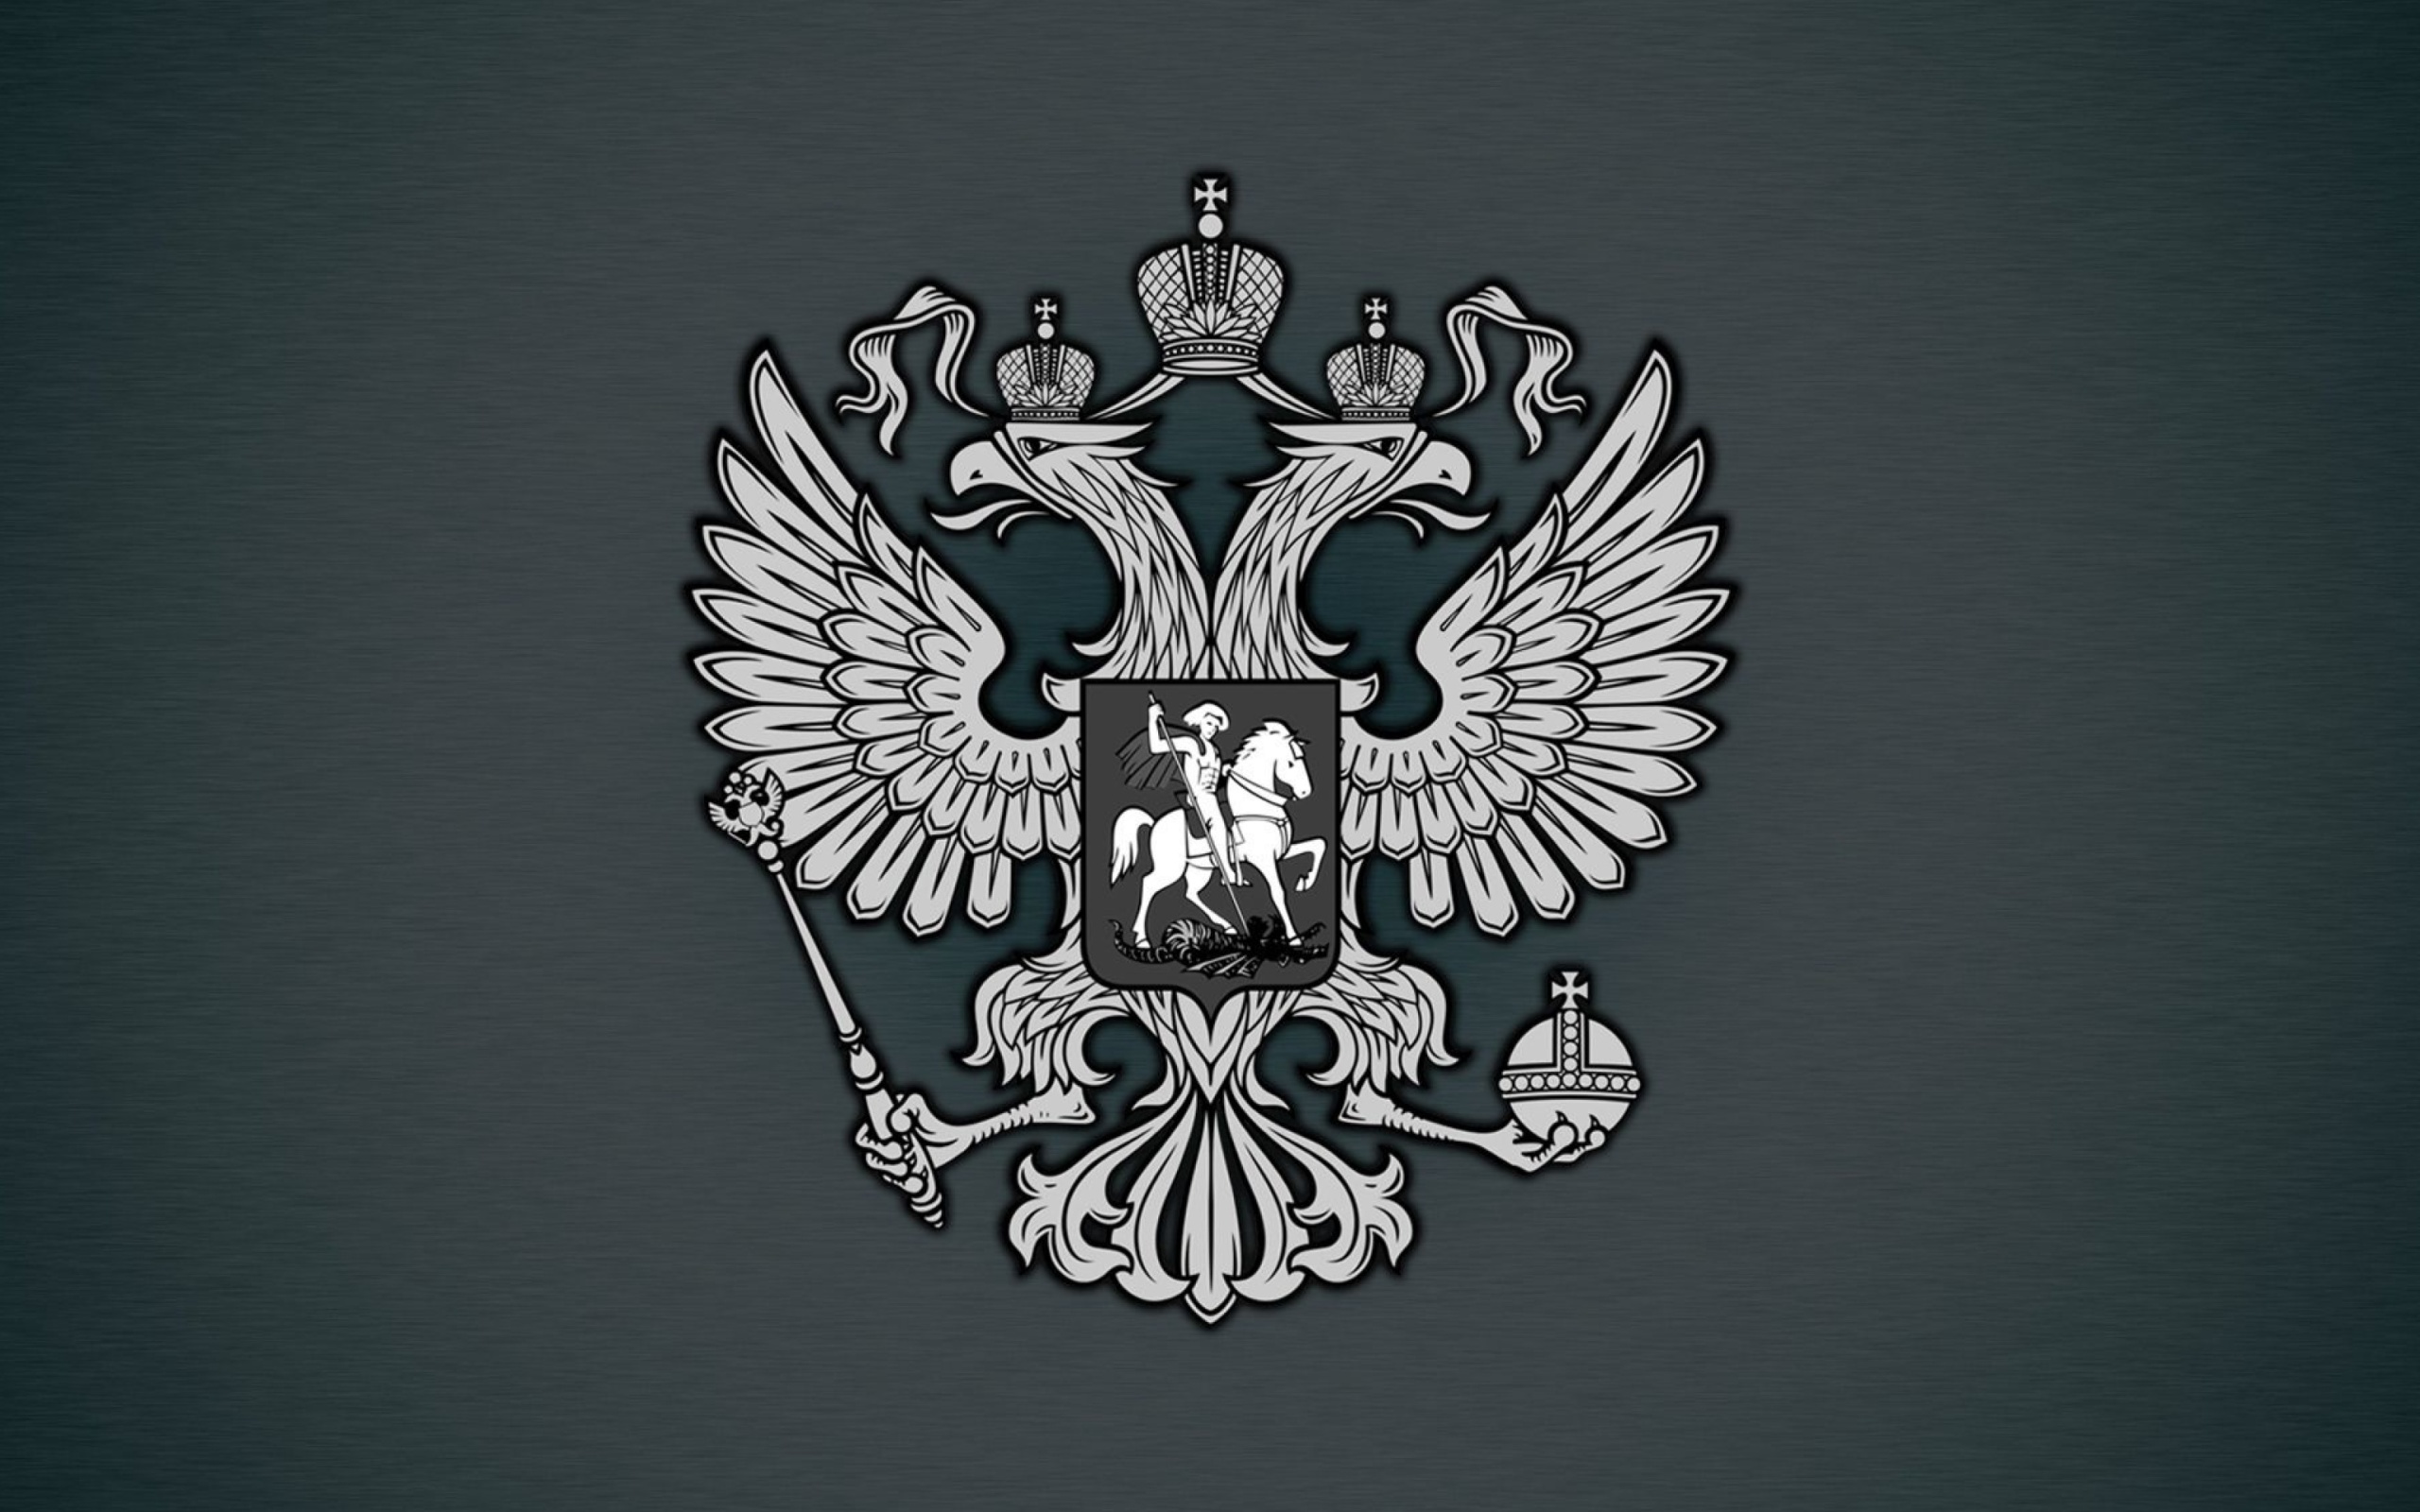 Coat of arms of Russia wallpaper 2560x1600